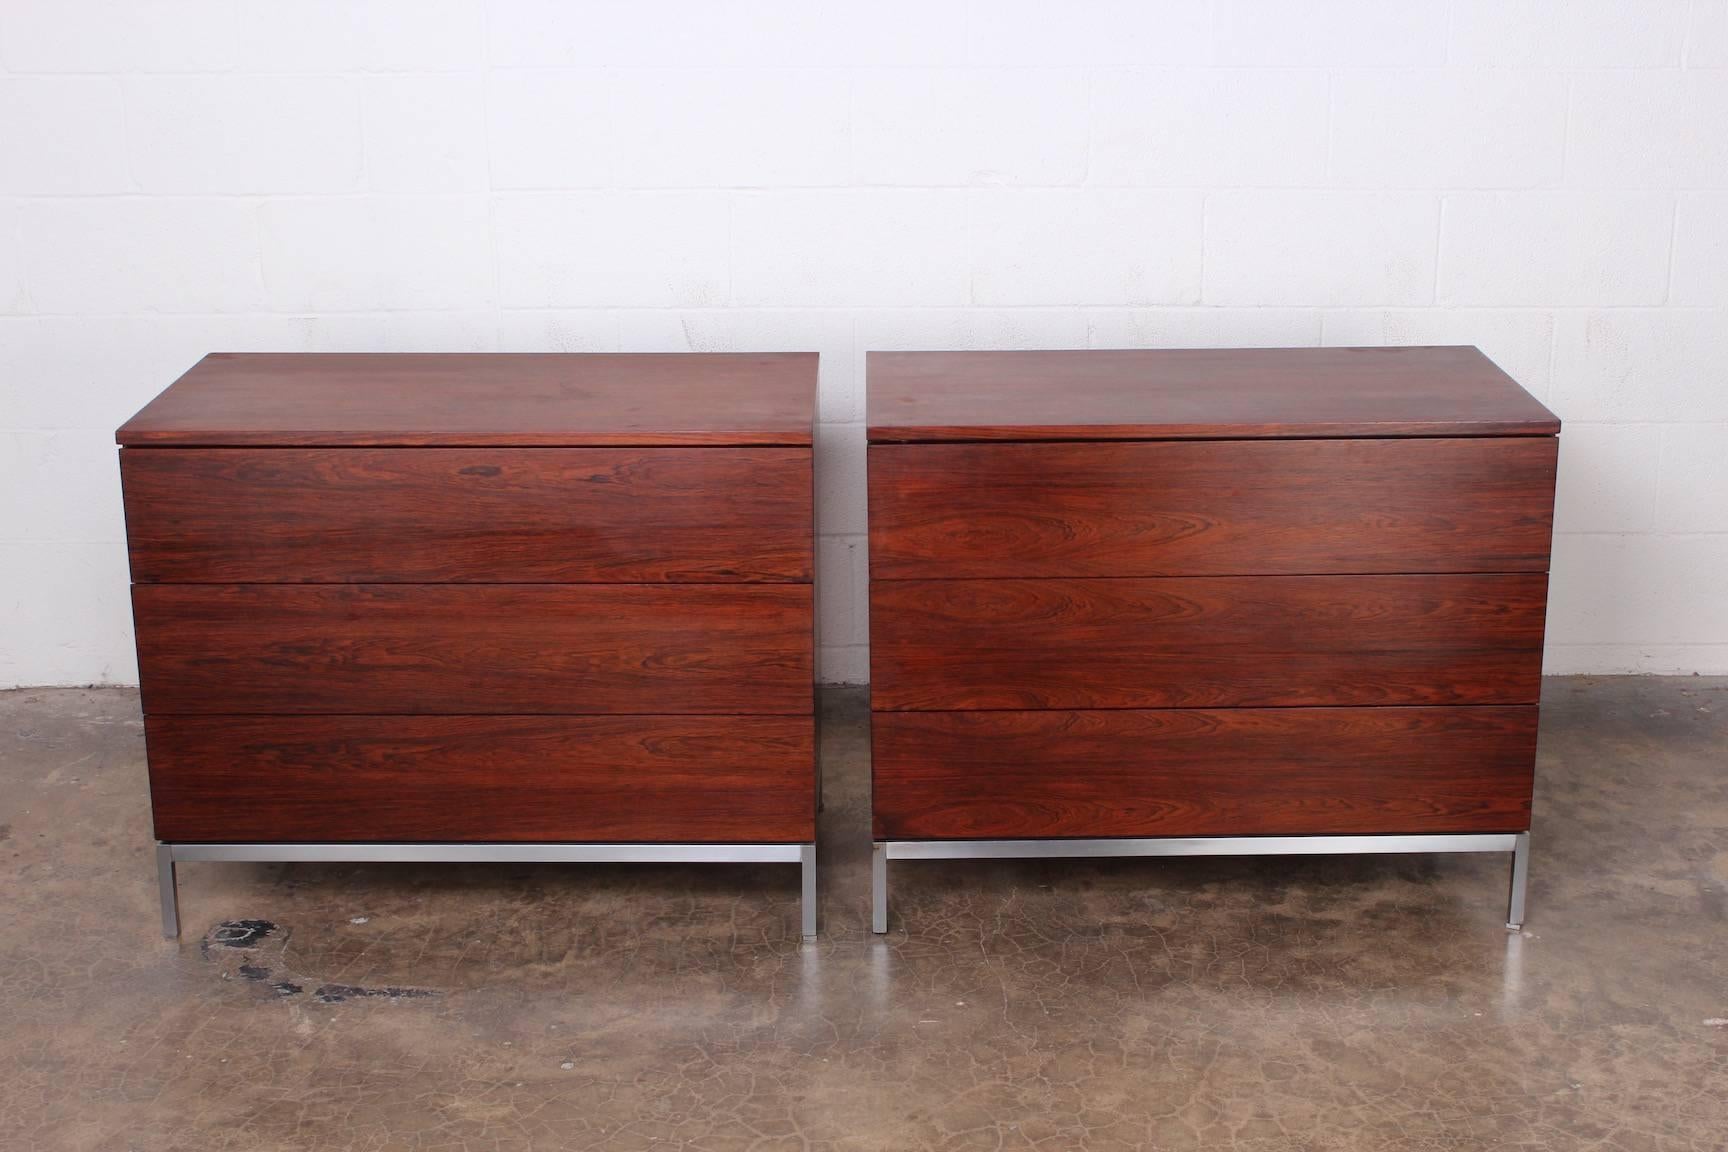 A pair of matching rosewood three-drawer dressers with brushed chrome bases. Designed by Florence Knoll for Knoll.